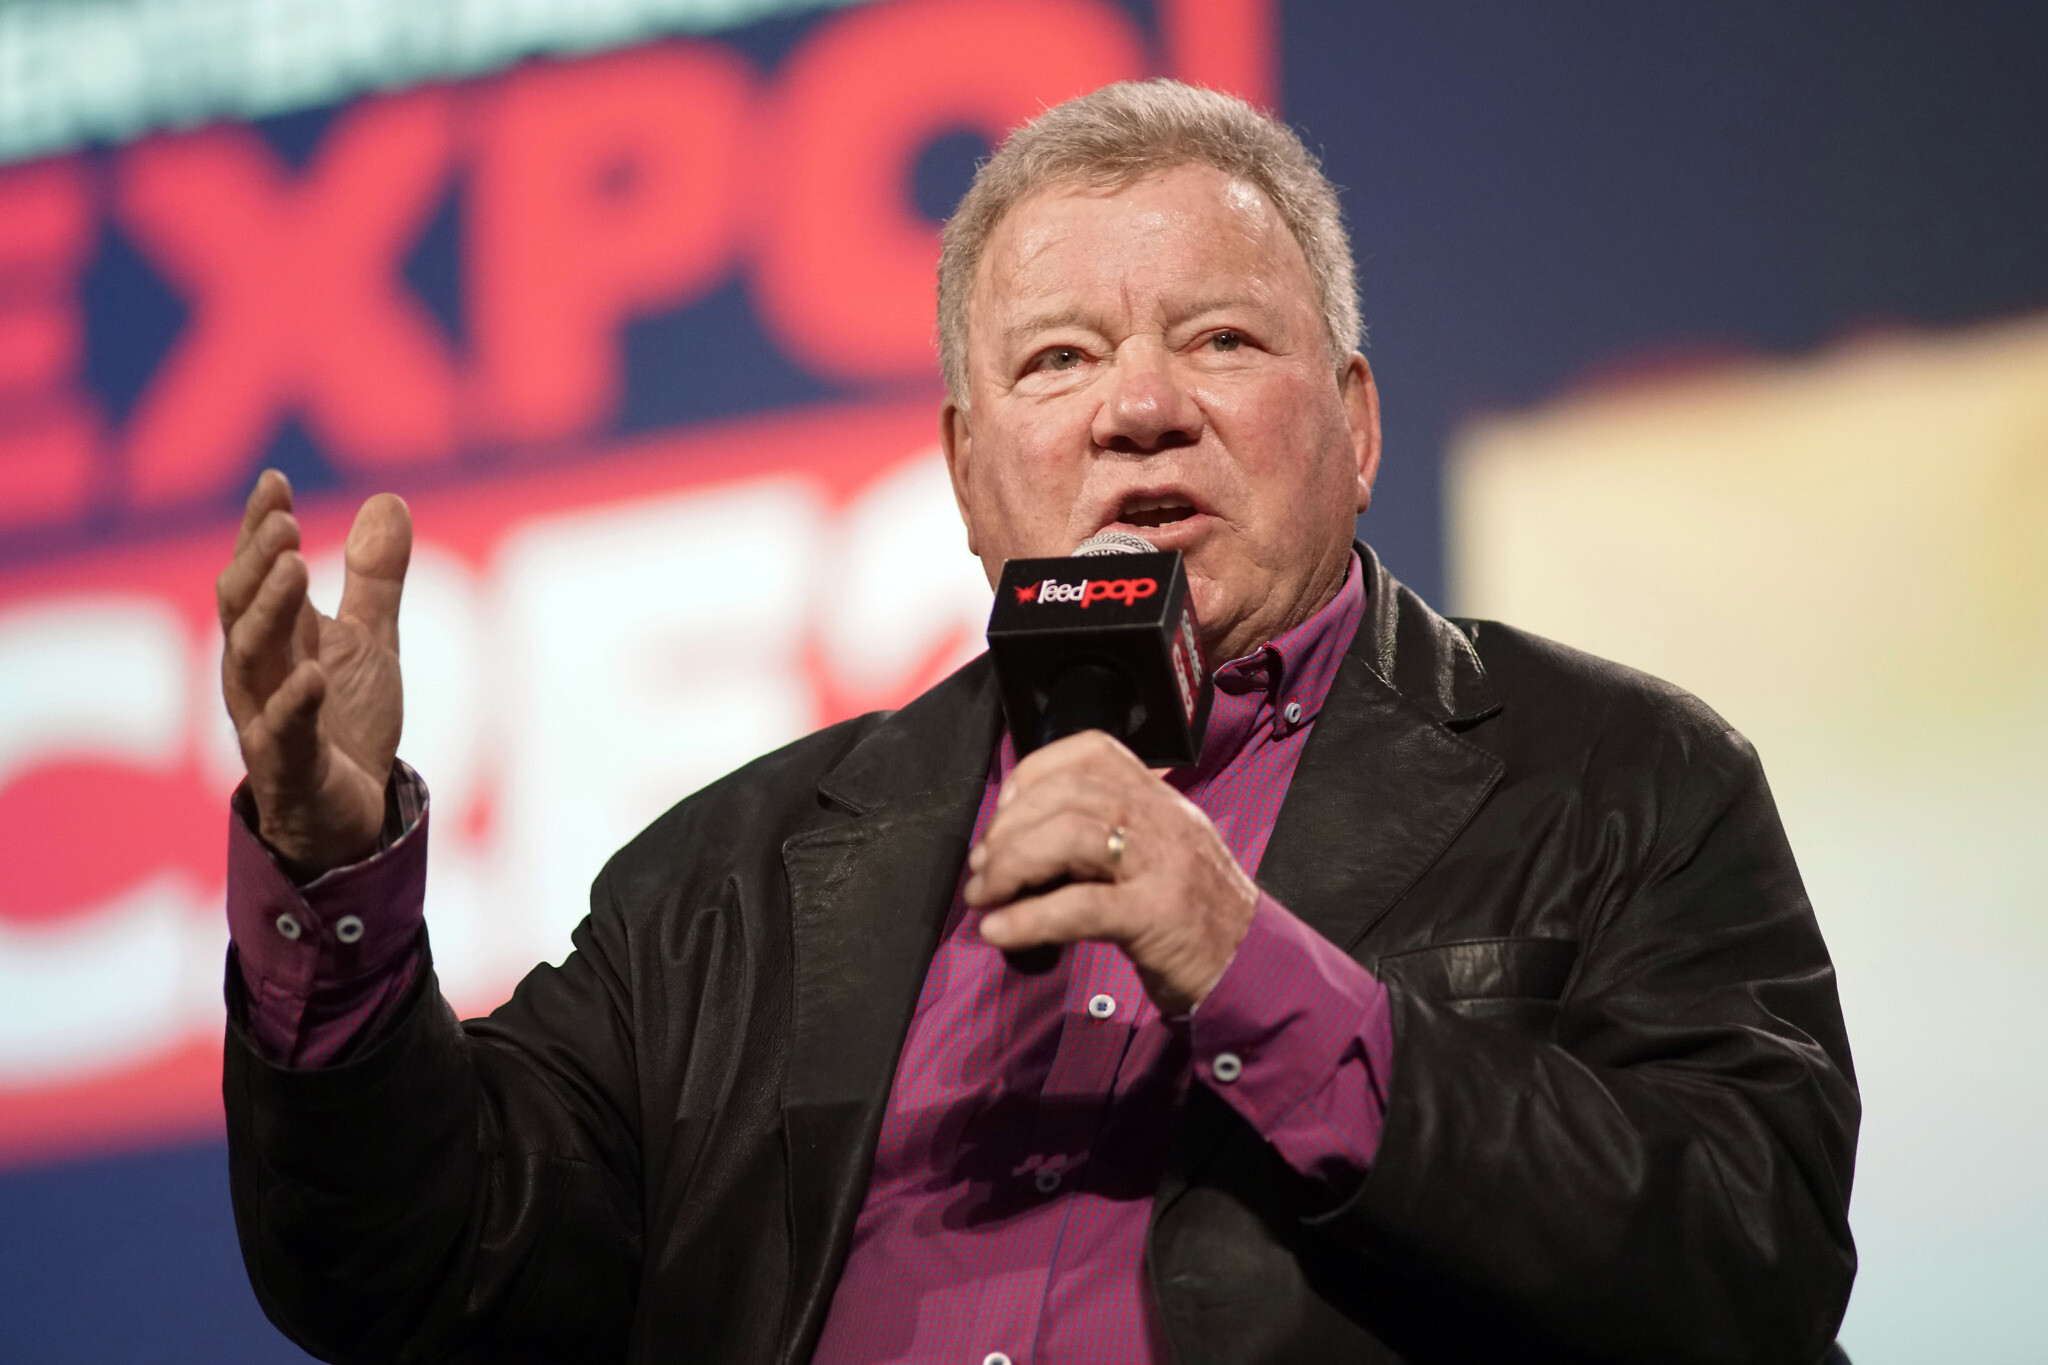 William Shatner to be immortalized in AI video for 90th birthday The